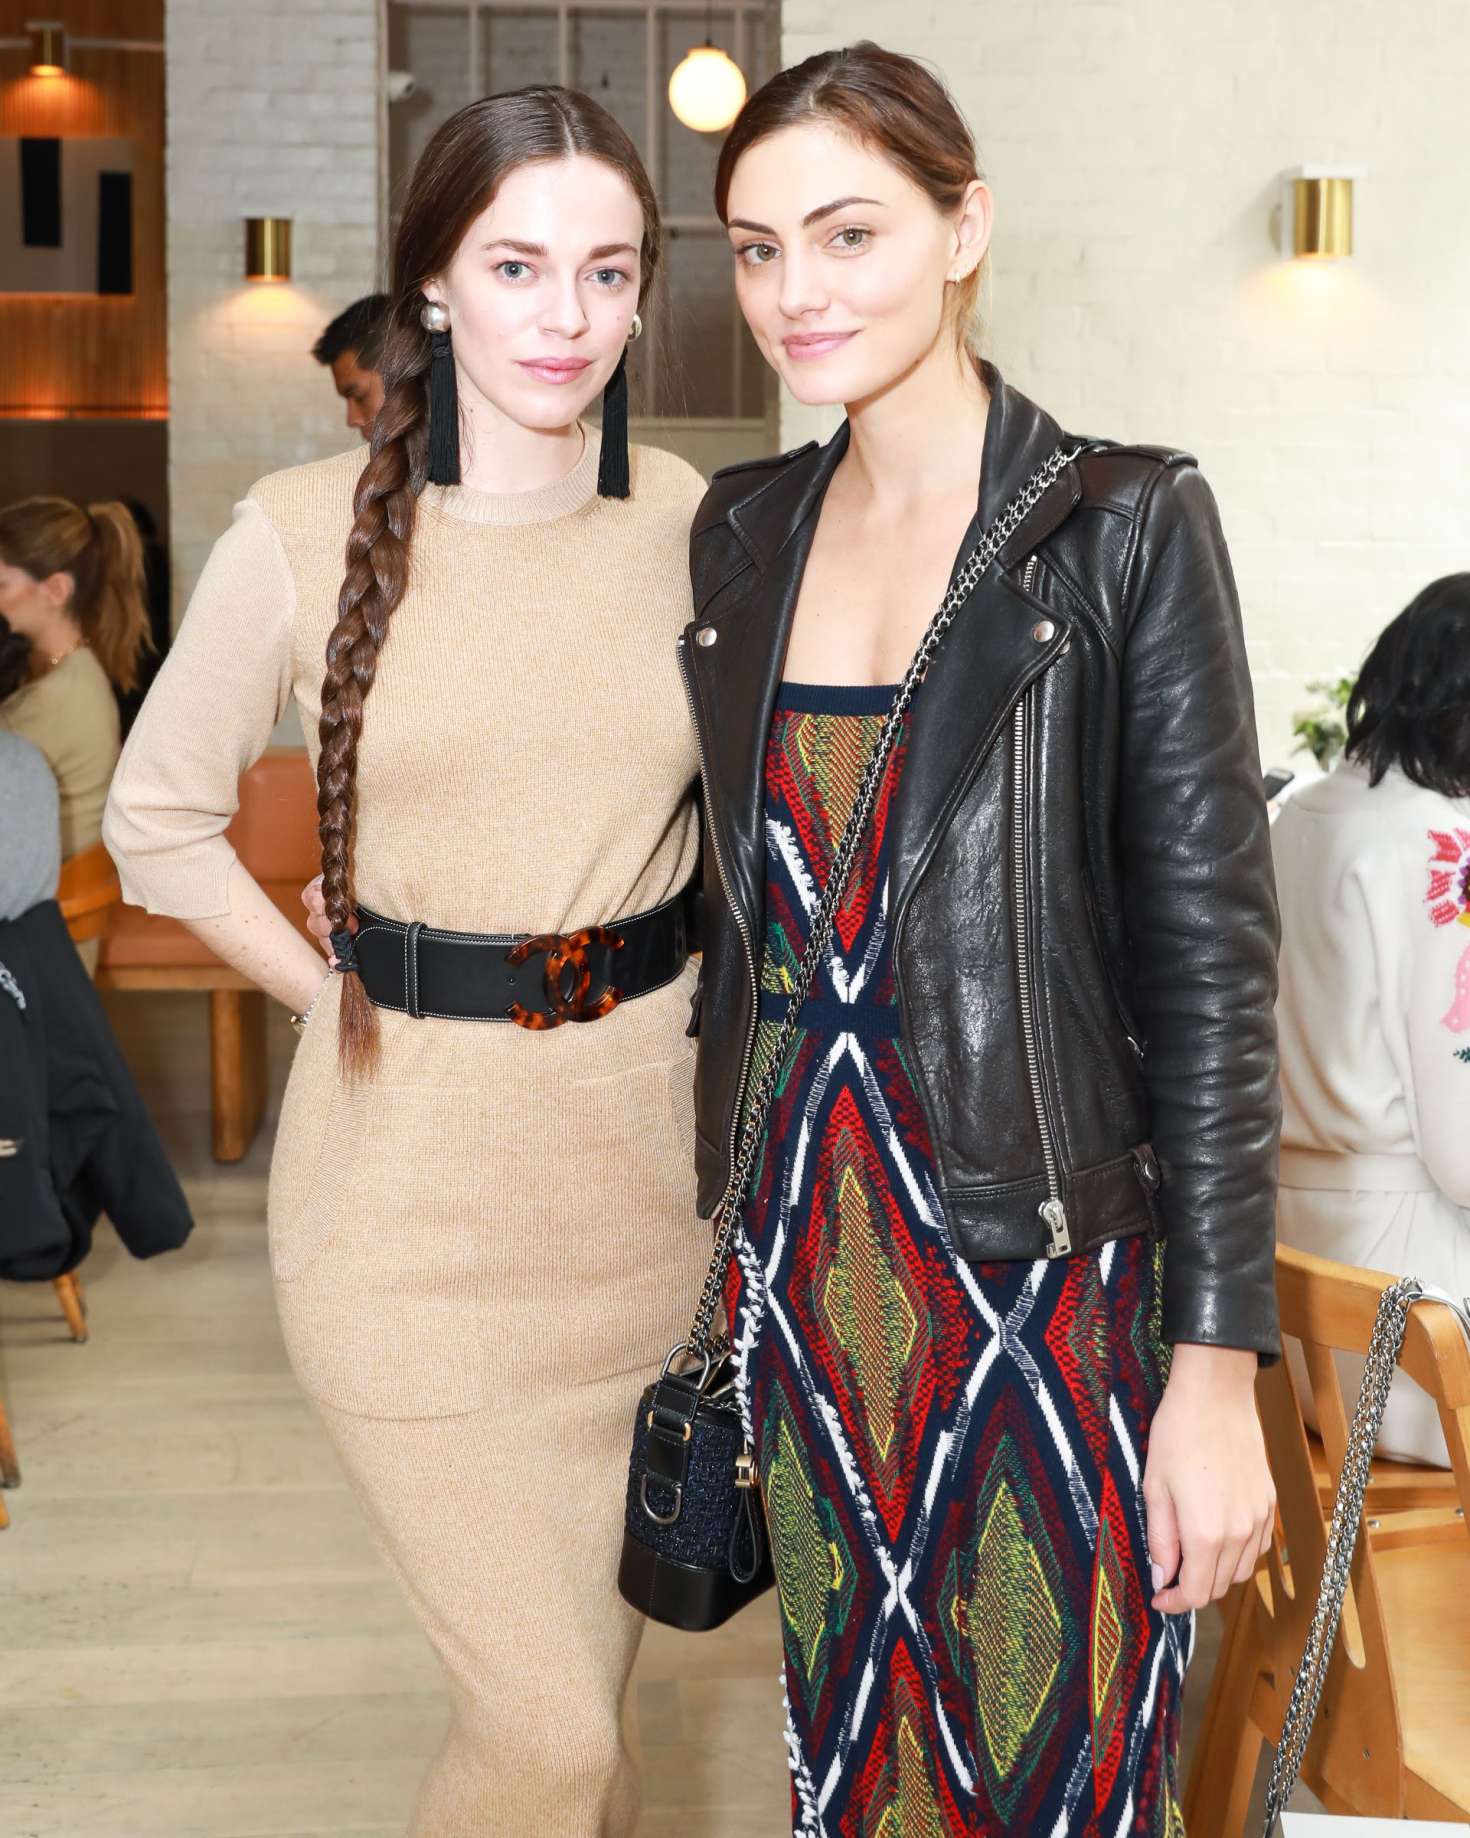 Phoebe Tonkin and Hailey Gates - Barrie's Friendsgiving Lunch hosted by Laure Heriard Dubreuil in NY